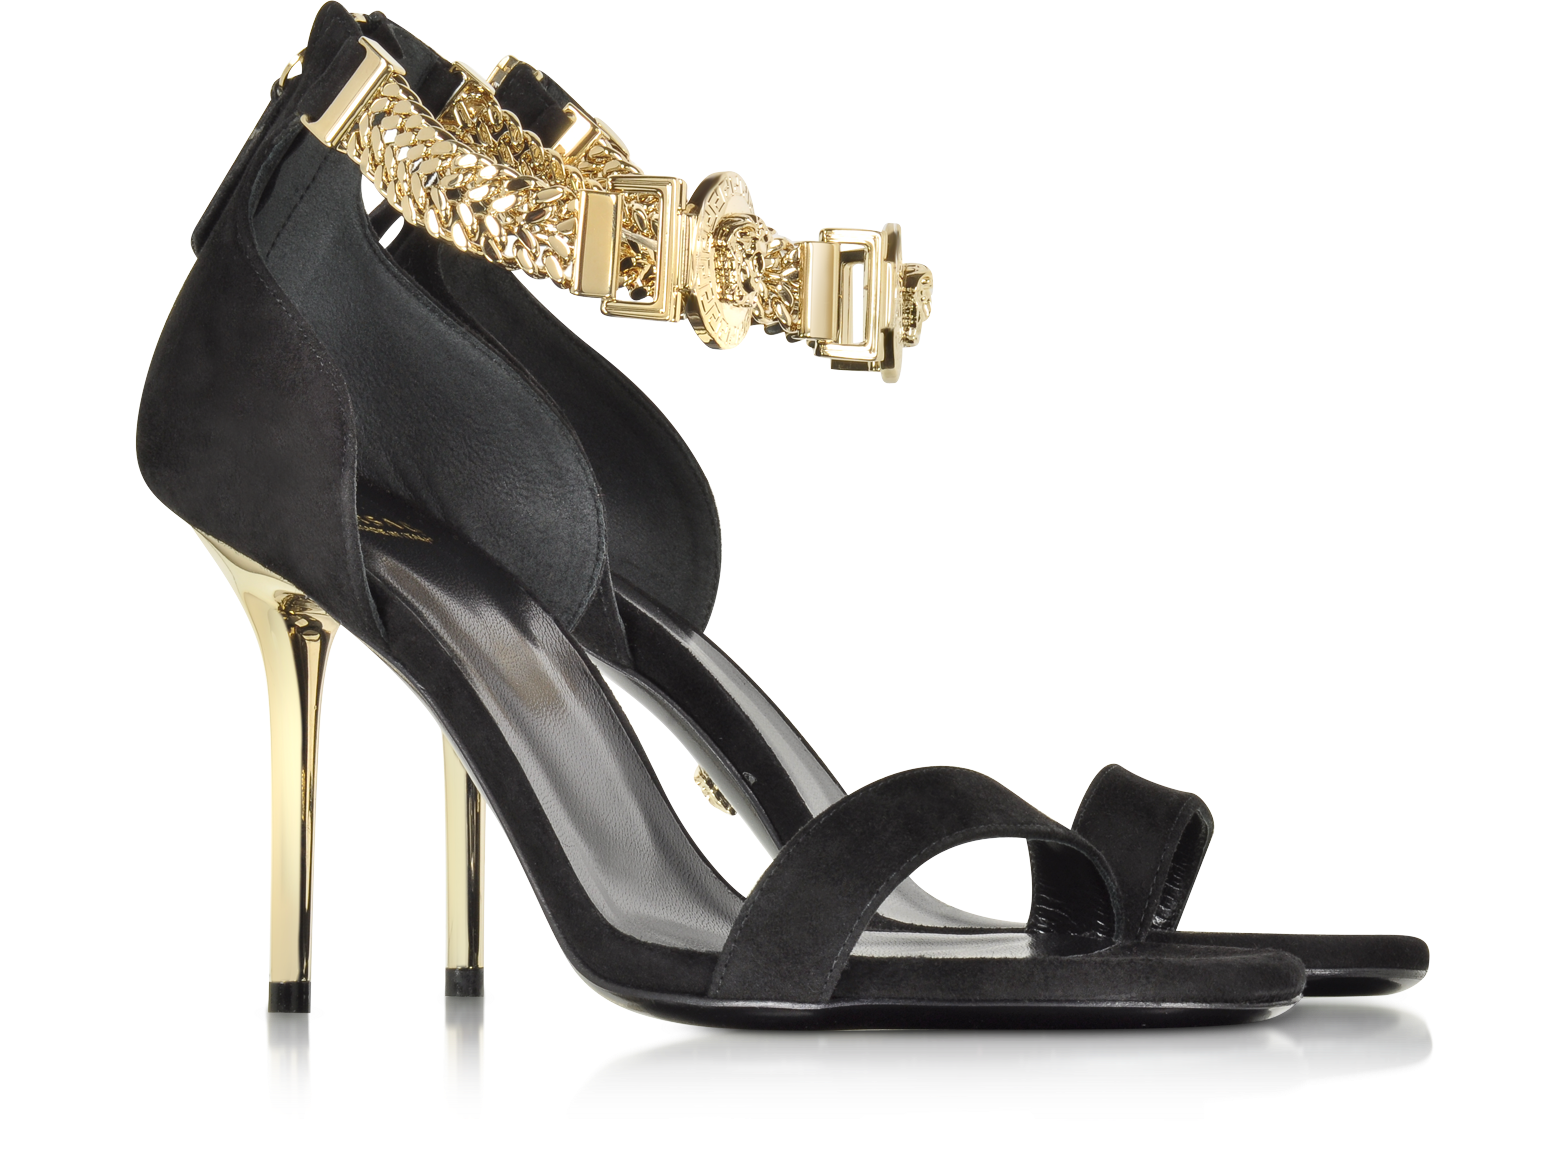 Versace Embellished Black Suede Ankle Strap Sandals 36 IT/EU at FORZIERI